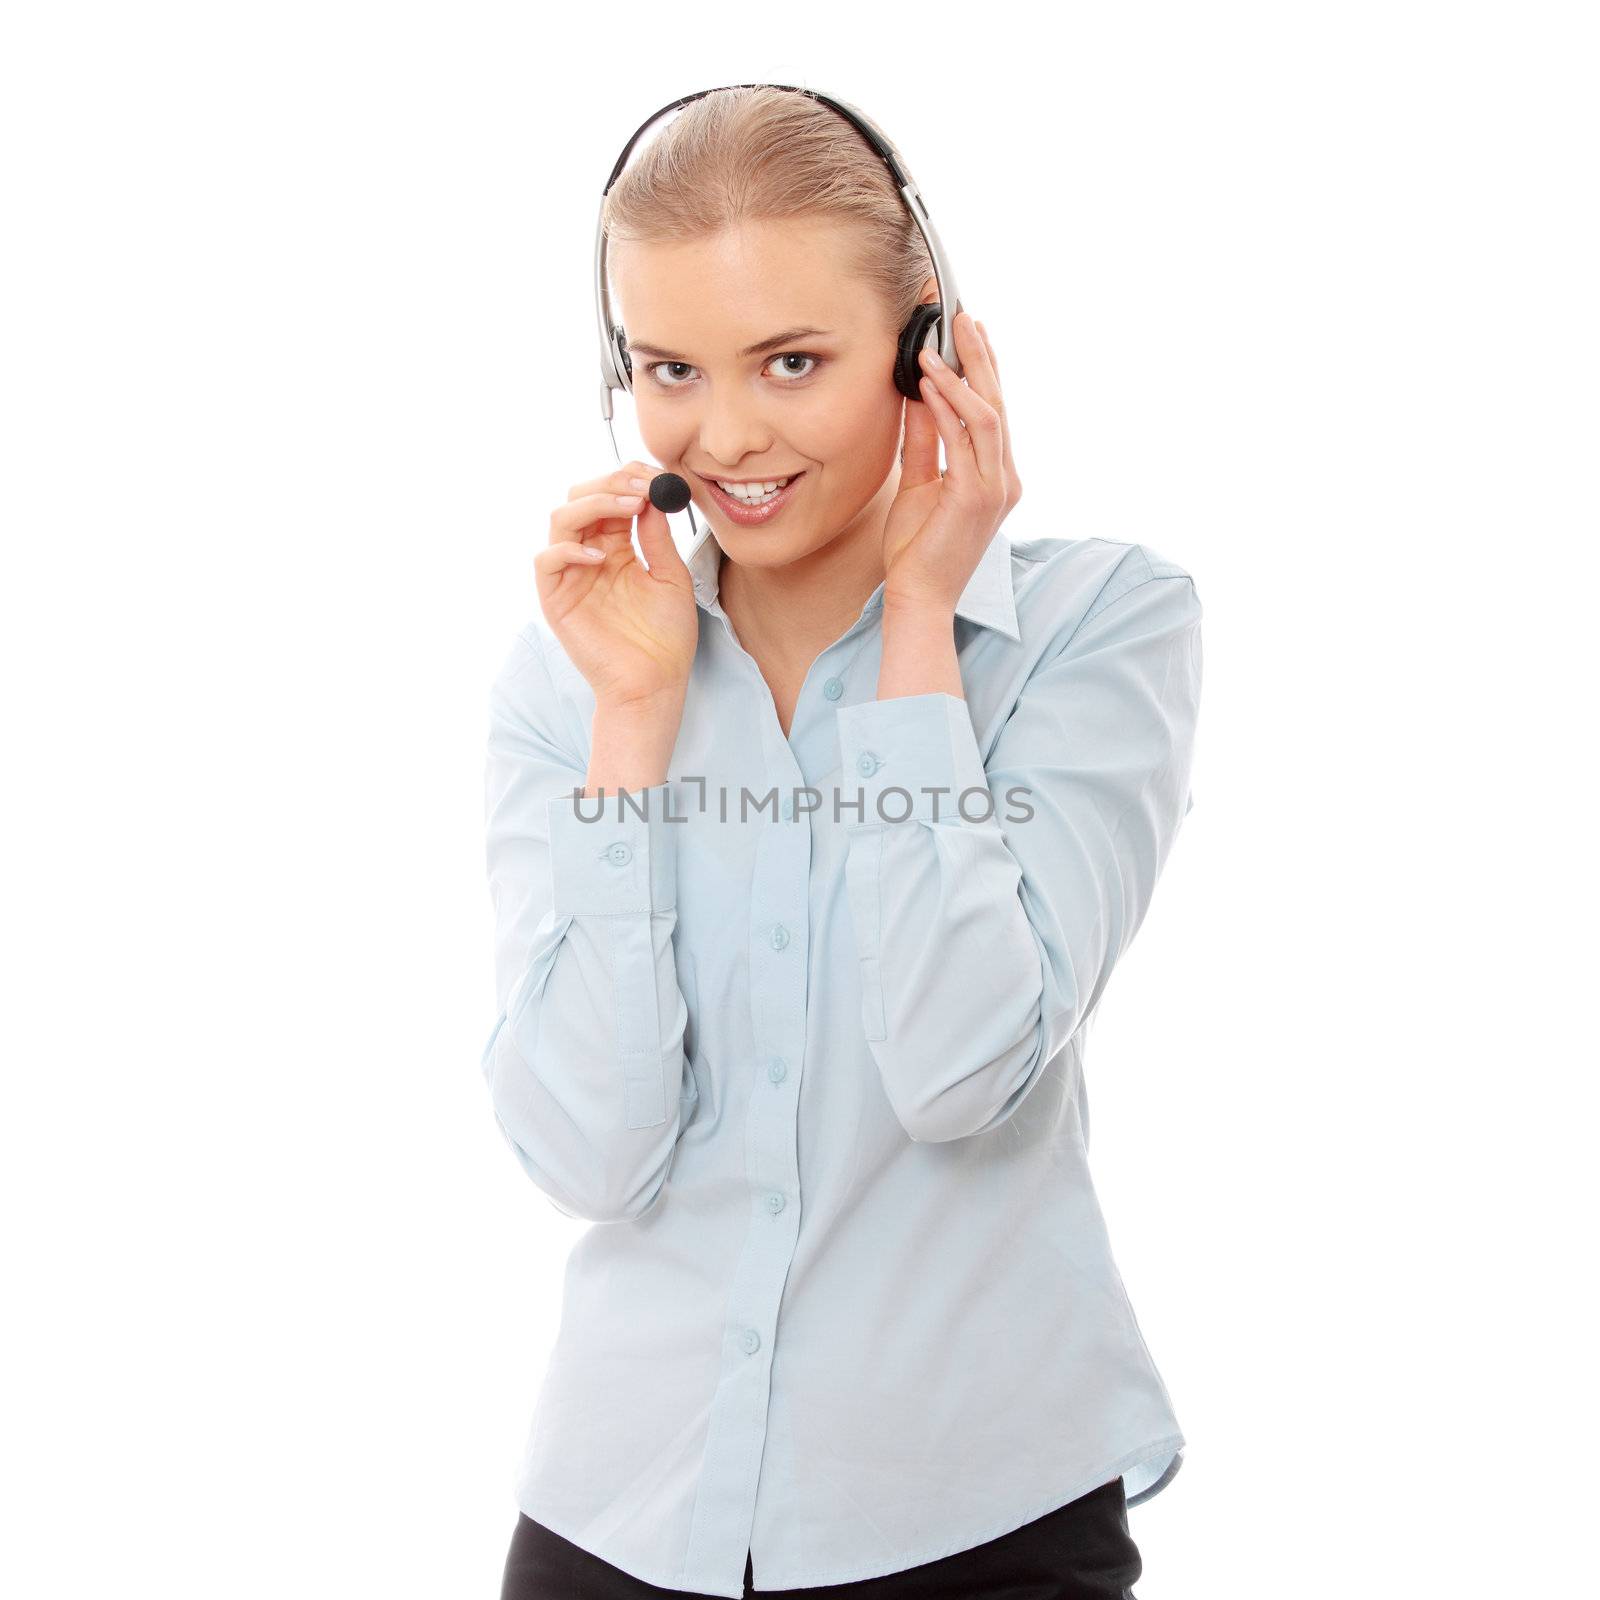 Call center woman with headset. Isolated on white background.